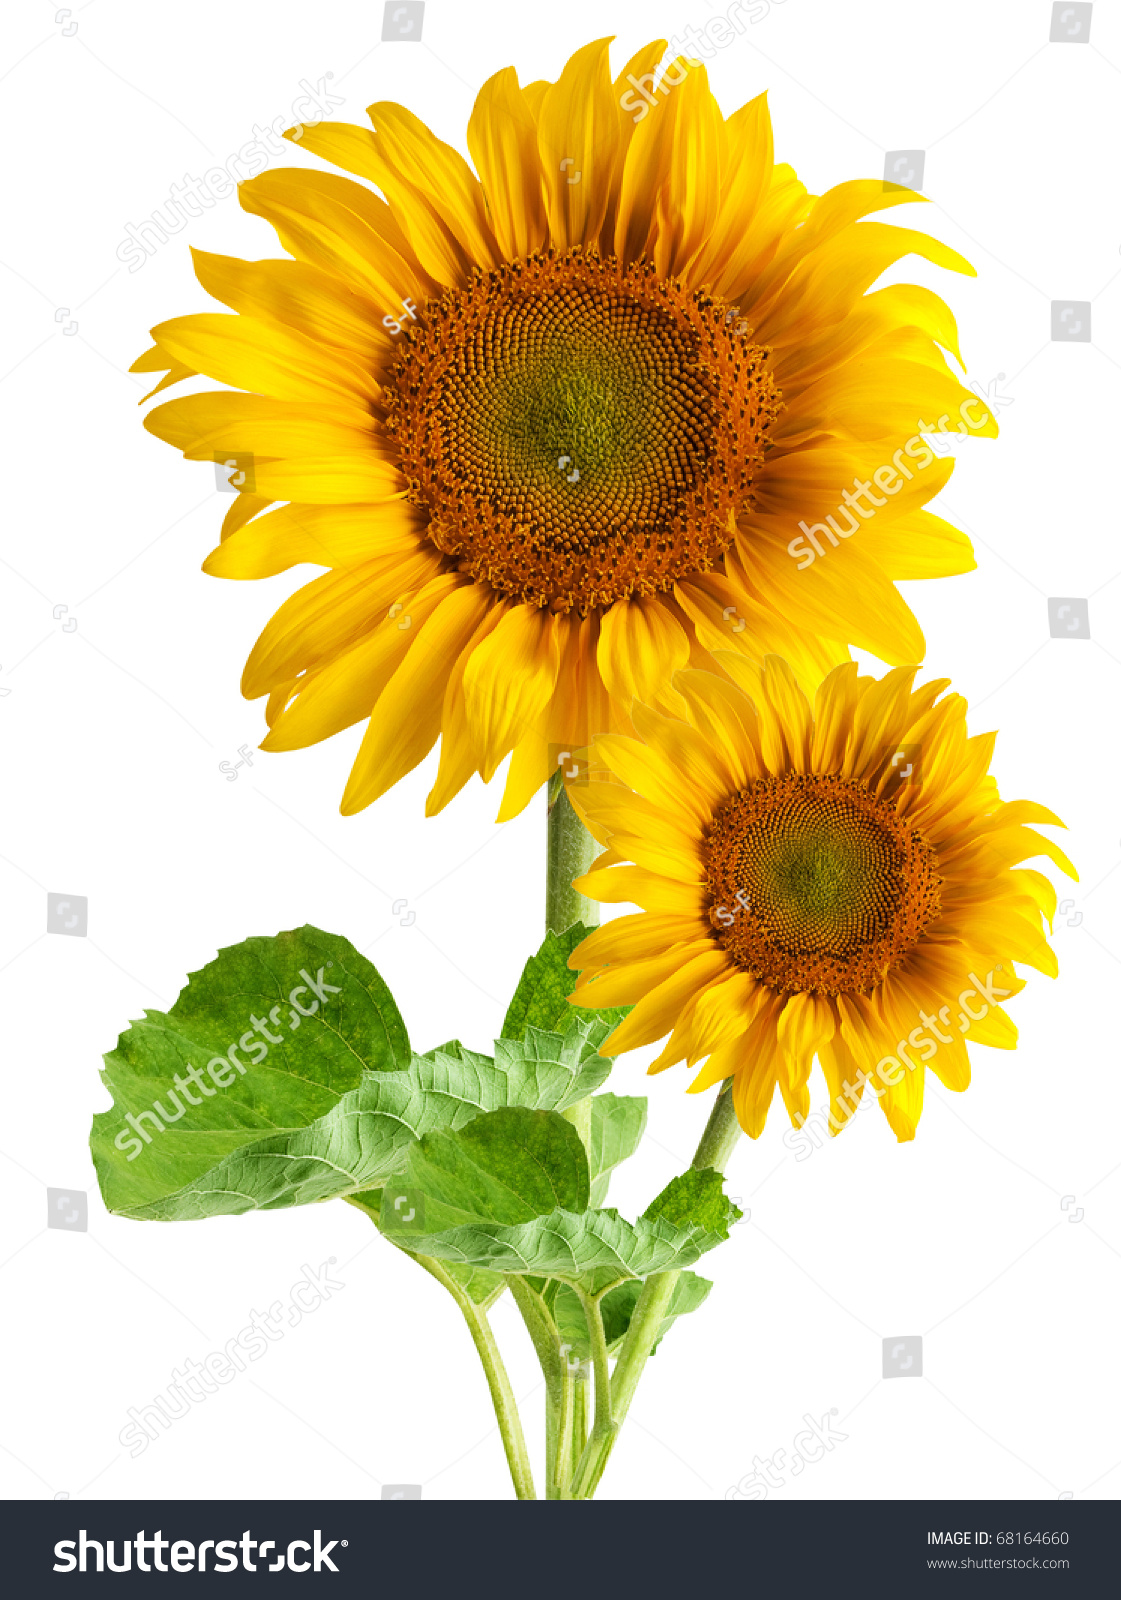 The Beautiful Sunflower Isolated On A White Background Stock Photo 68164660 : Shutterstock